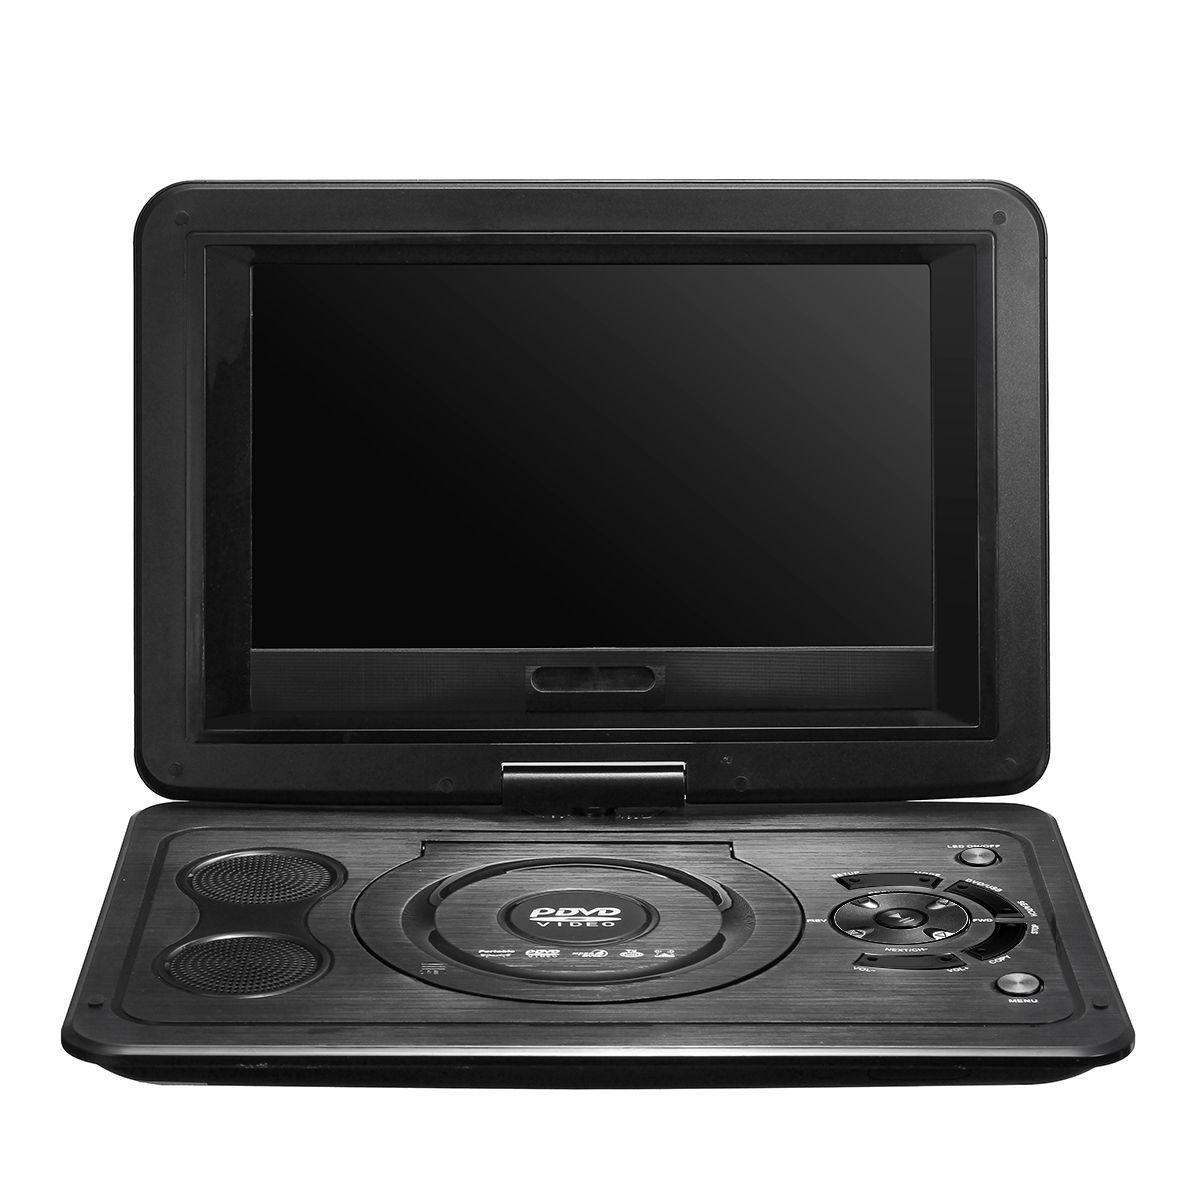 Portable-139inch-3D-Car-TV-HD-DVD-Player-270deg-Rotate-USB-300-Games-with-Remote-1558424